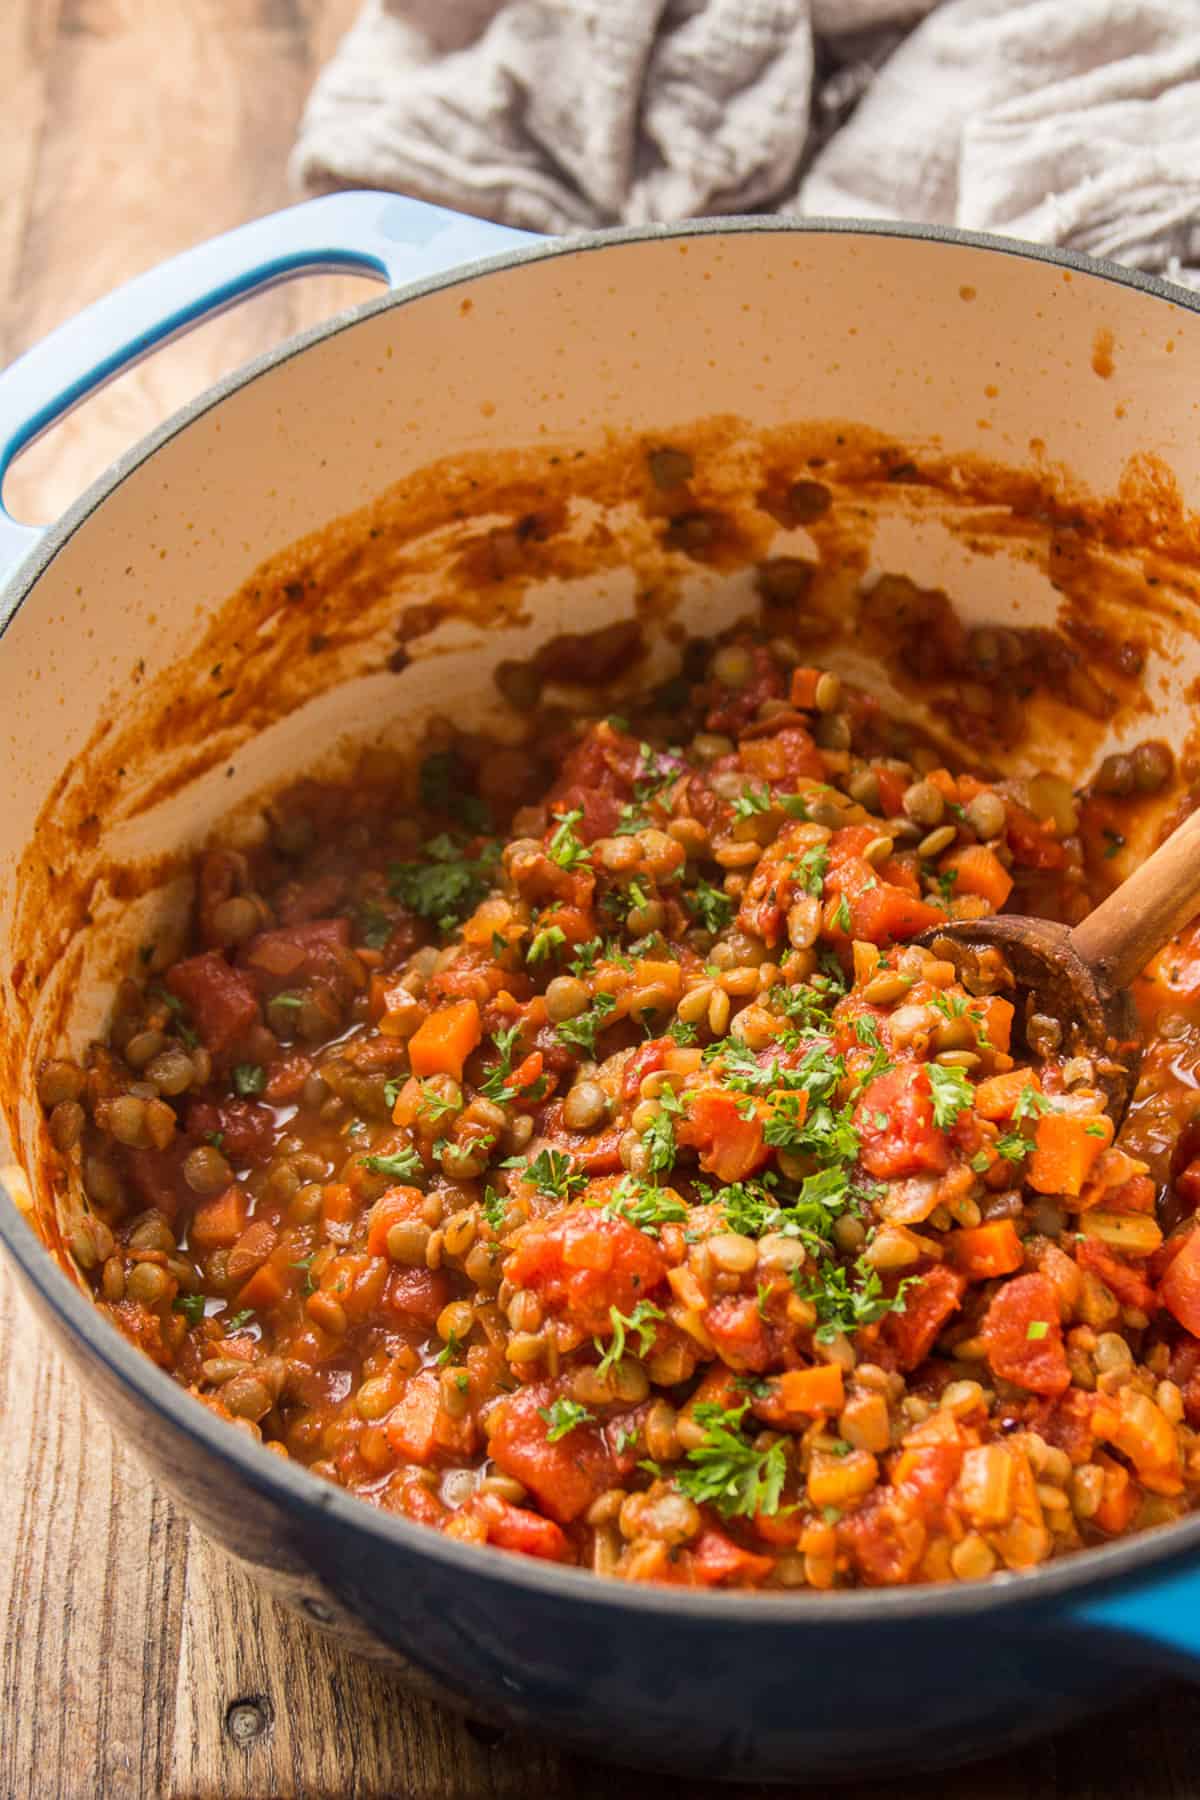 Pot of Lentil Bolognese with a wooden spoon.